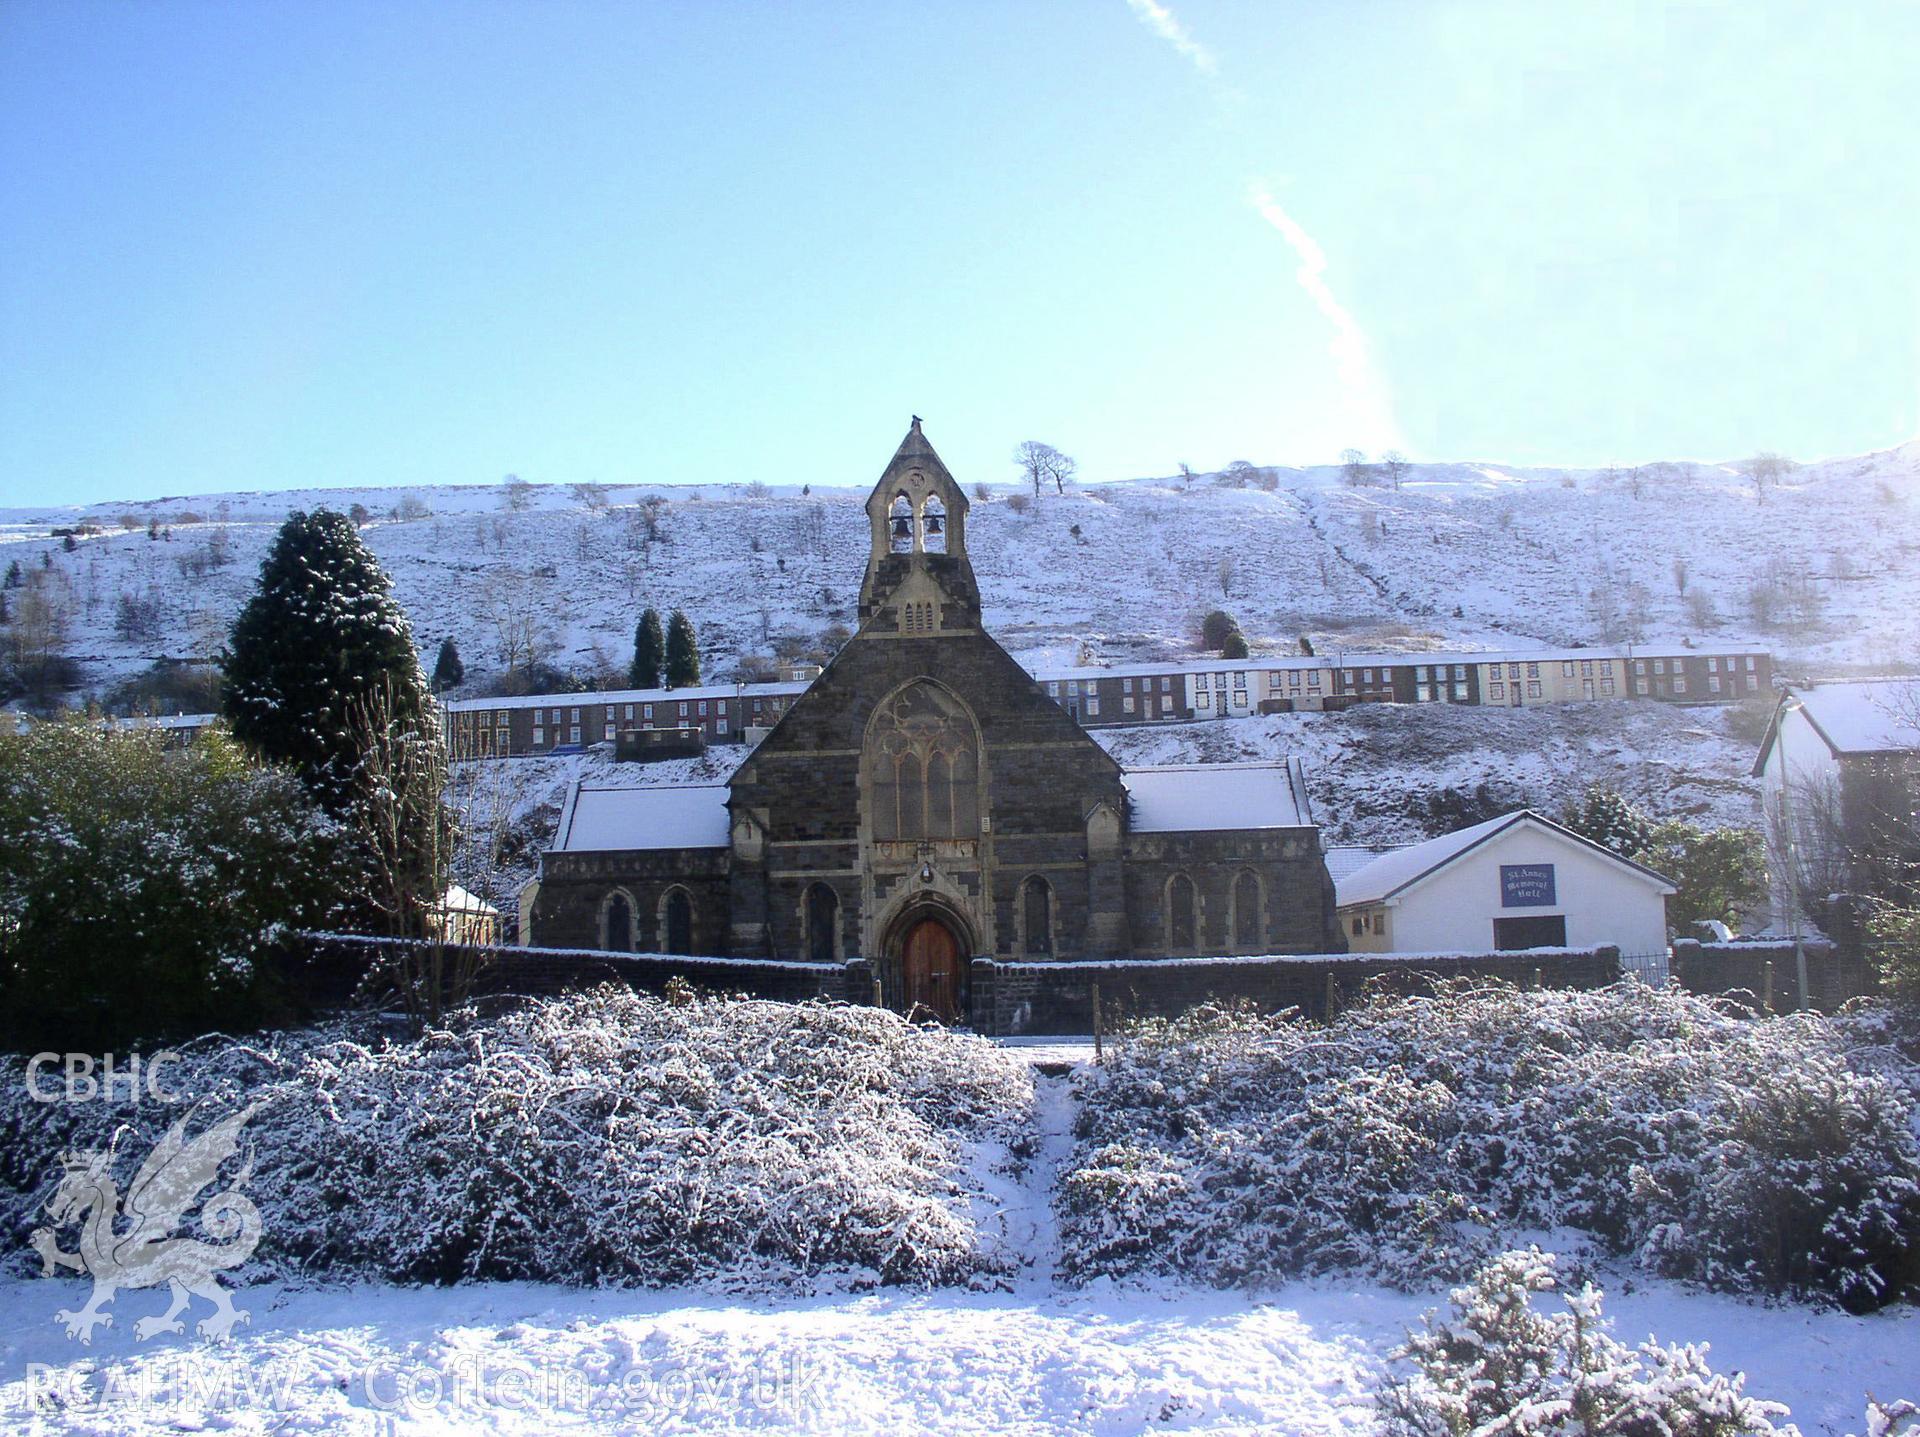 Colour digital photograph showing an elevation view of St Anne's Church, Ynyshir; Glamorgan. The photograph shows the church covered in the snow.